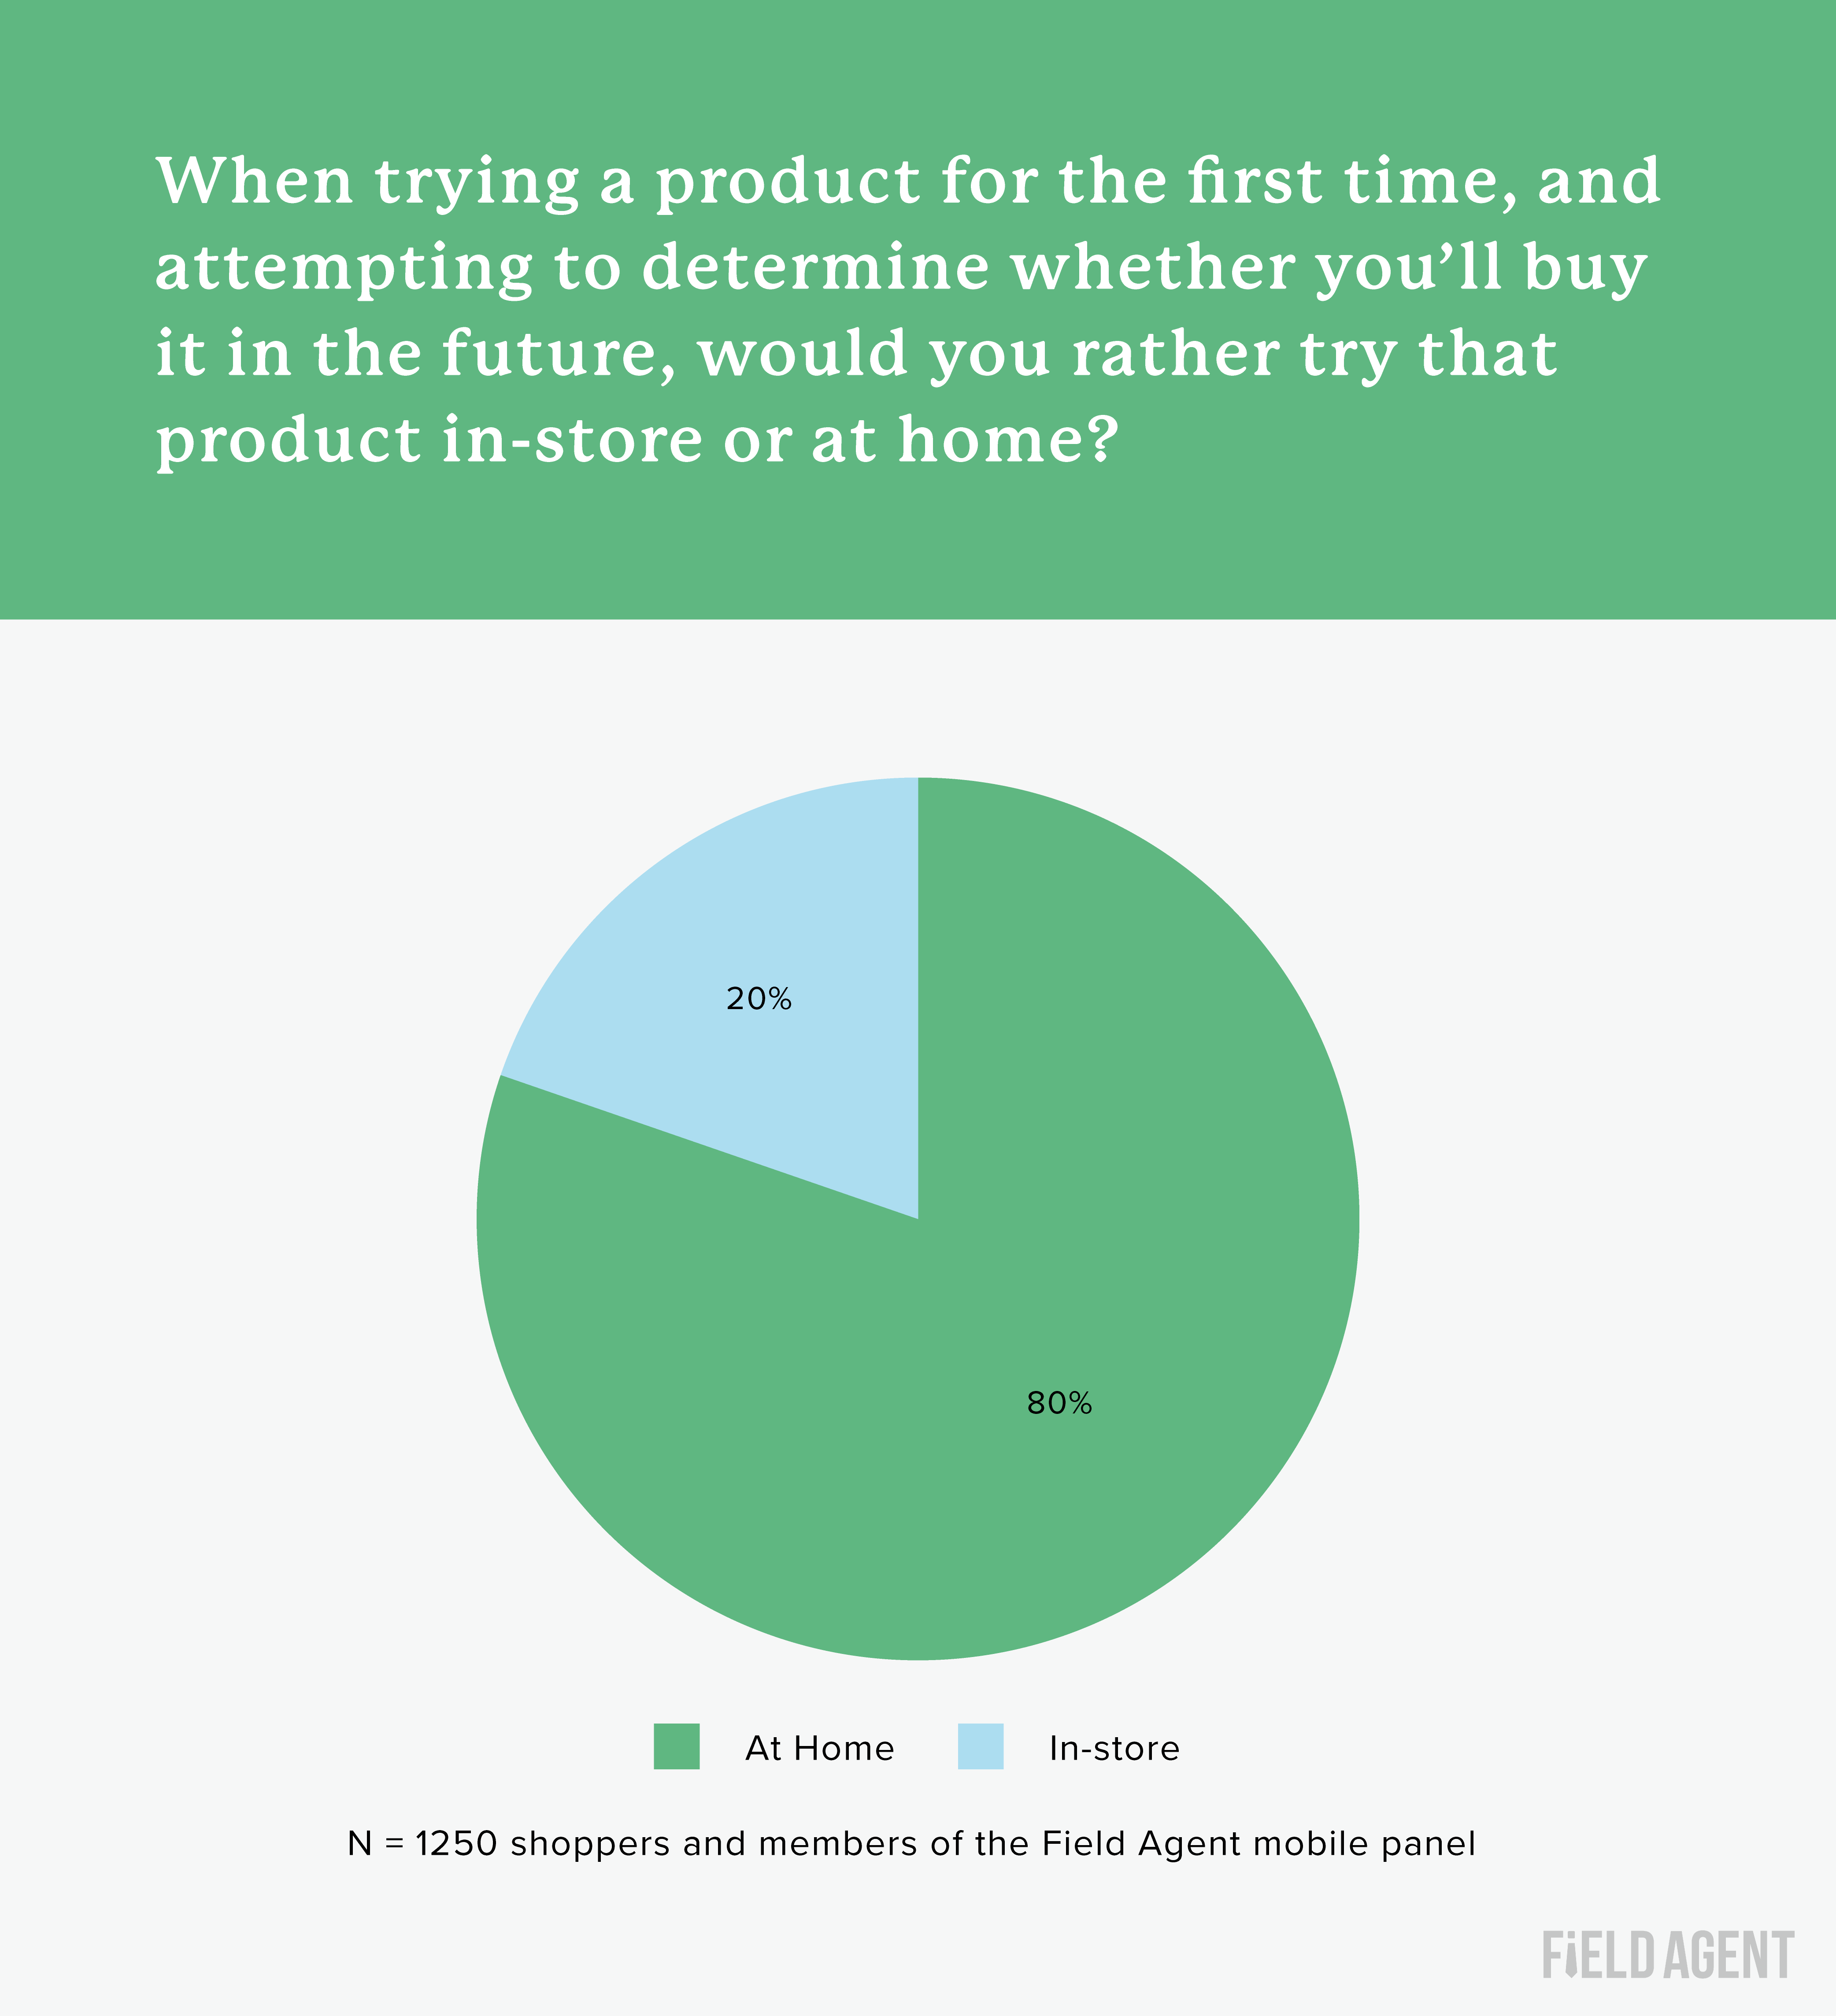 Graph: Would shoppers rather try a product for the first time in-store or at home?